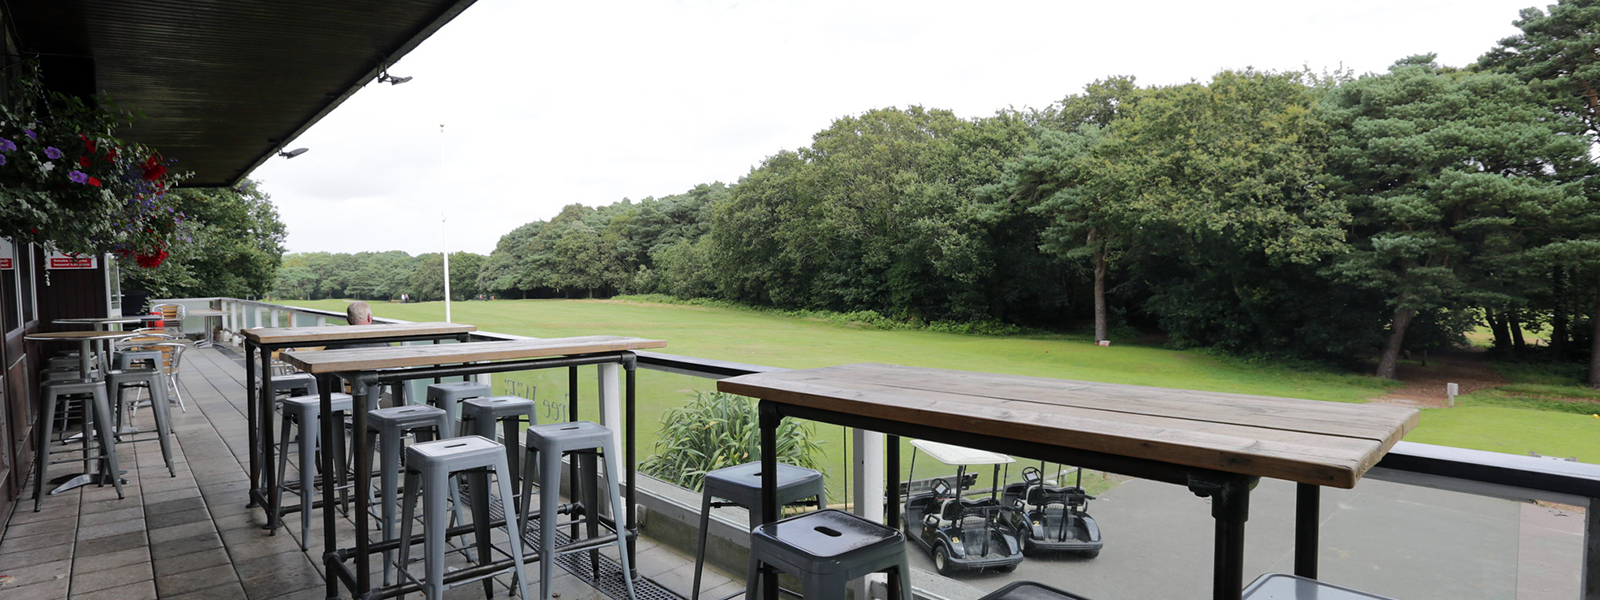 The balcony at Woodpecker Cafe, Queens Park overlooking the first tee